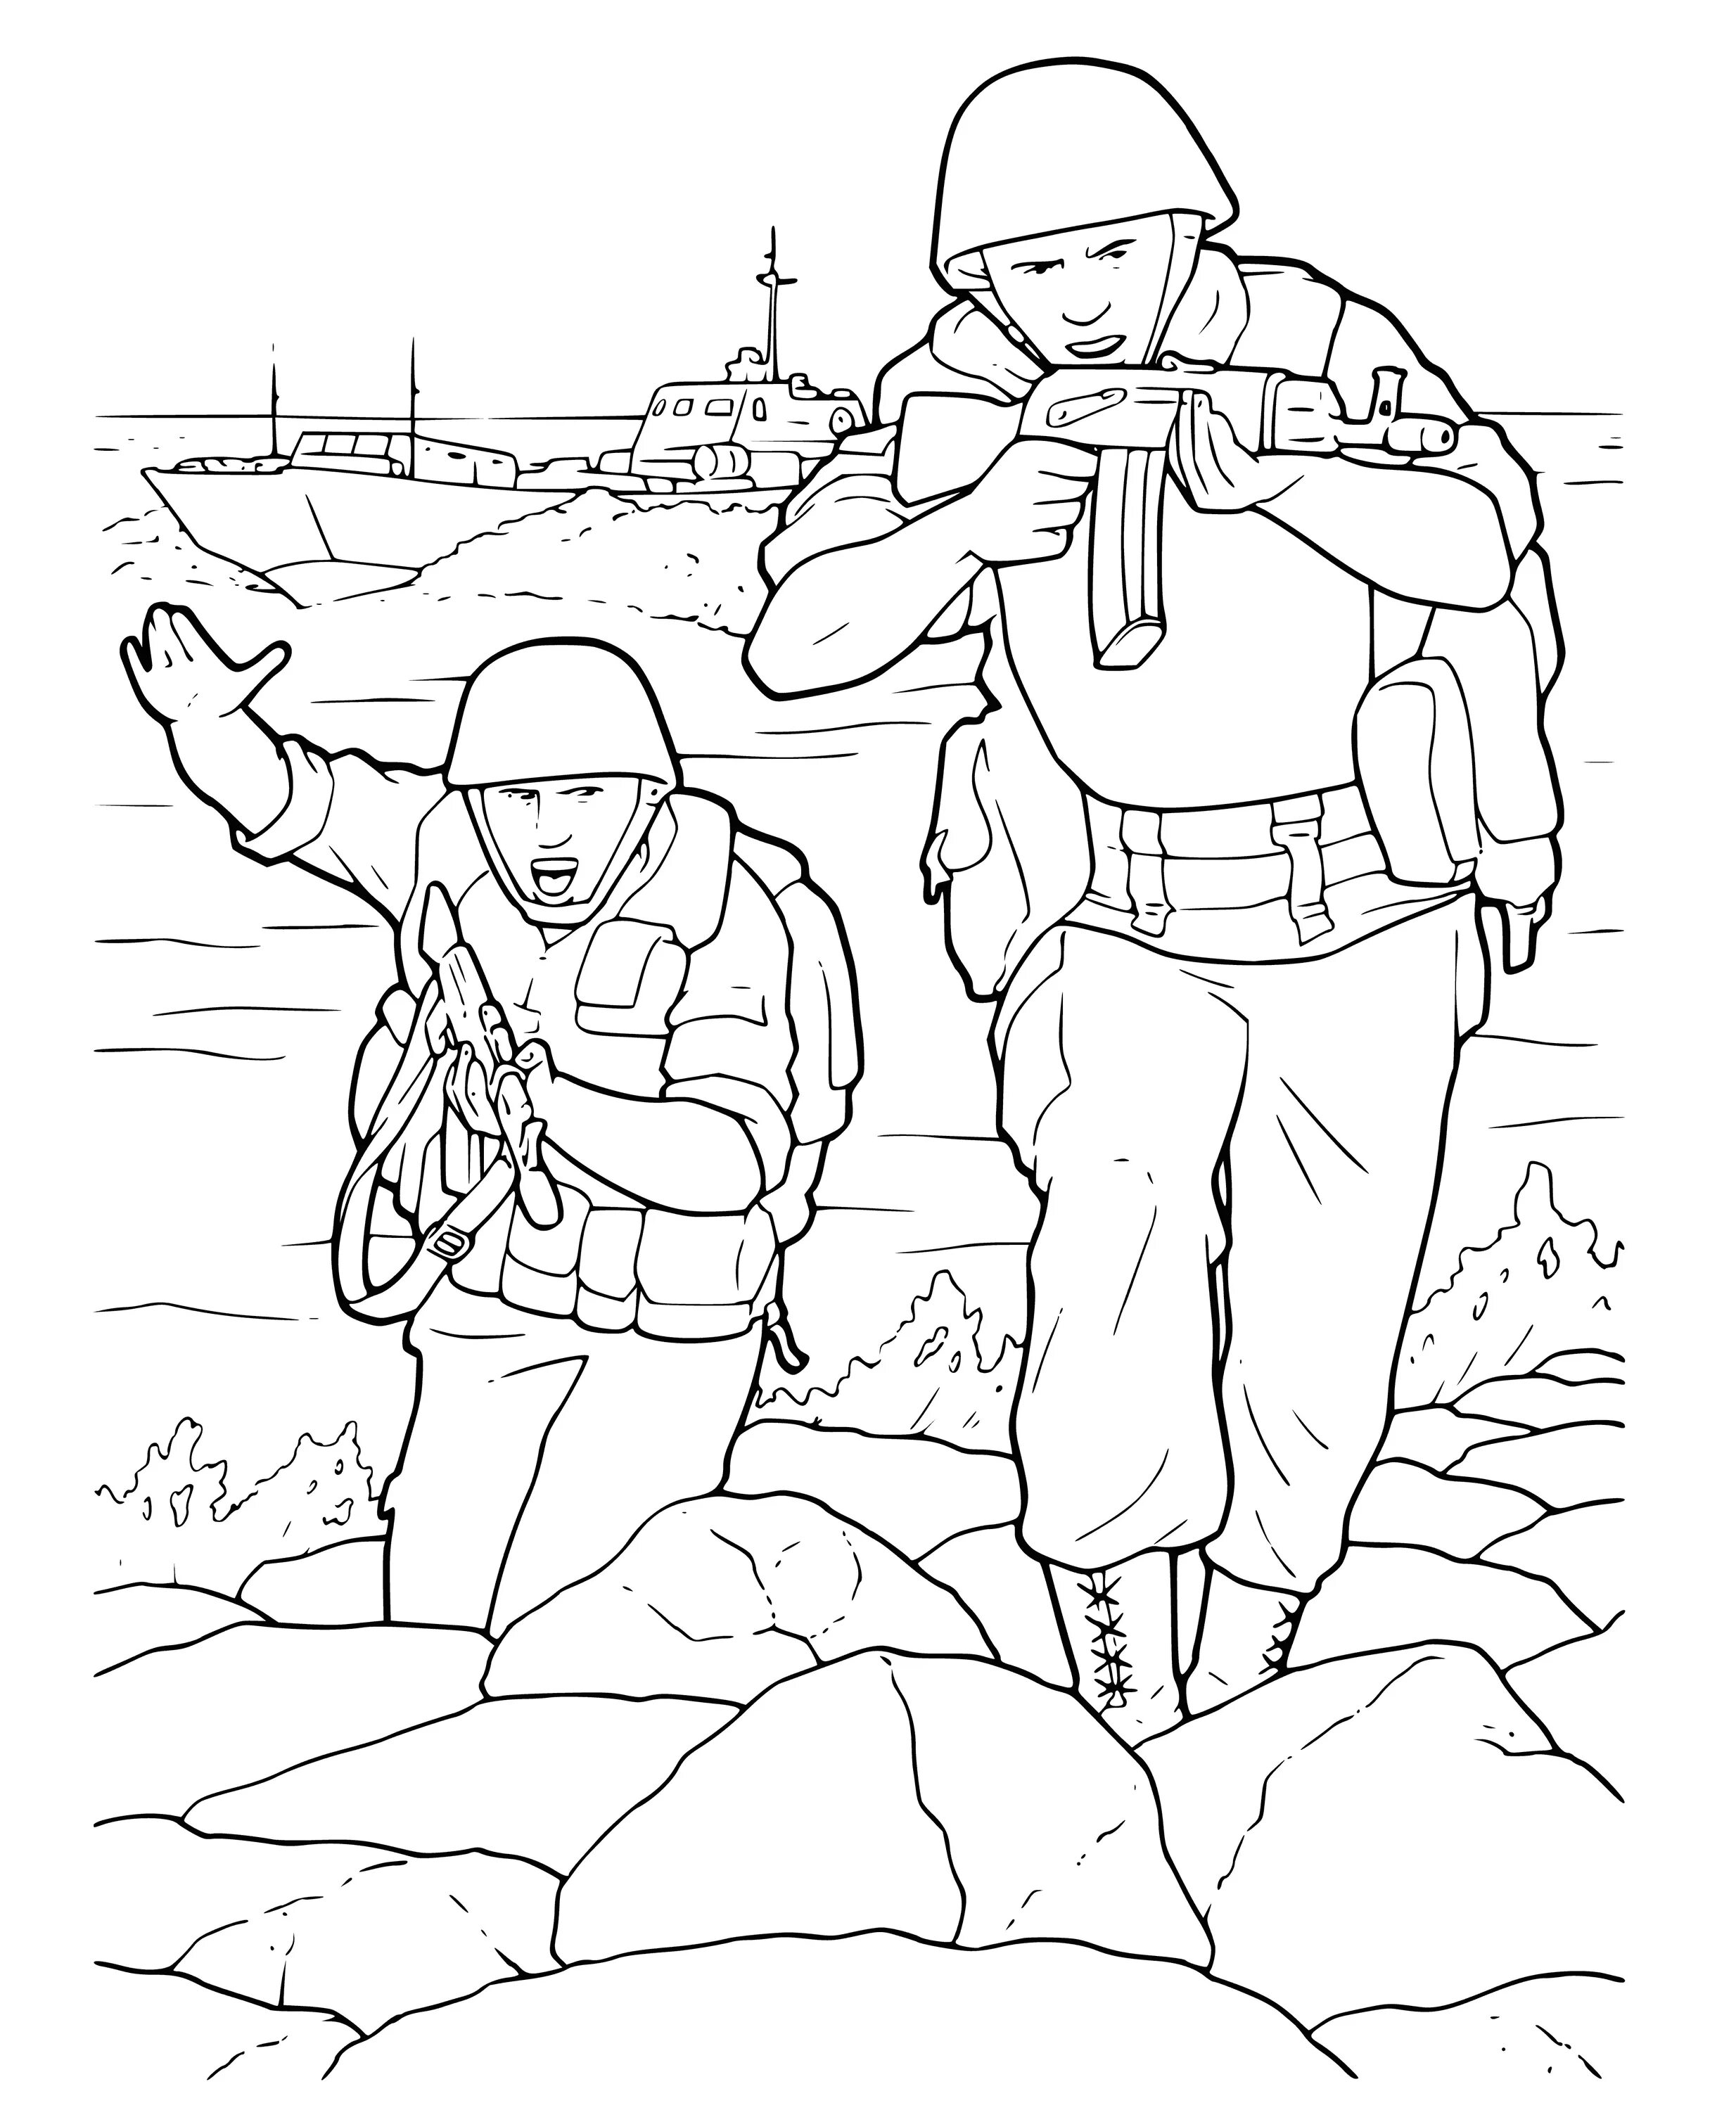 Exciting coloring pages Russian army soldiers